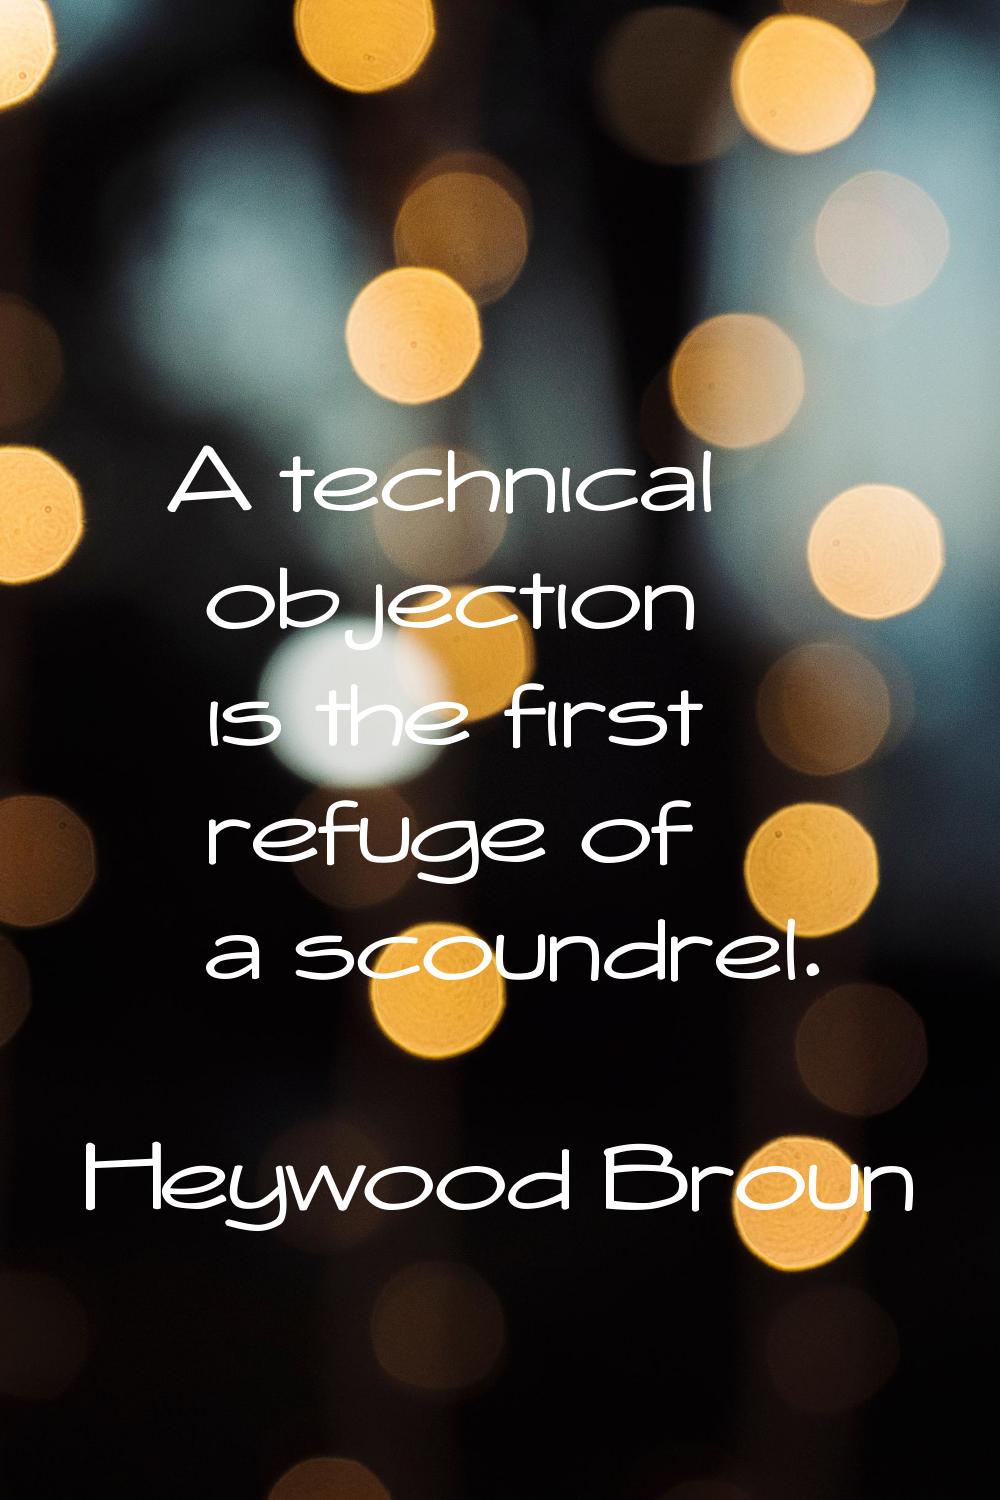 A technical objection is the first refuge of a scoundrel.